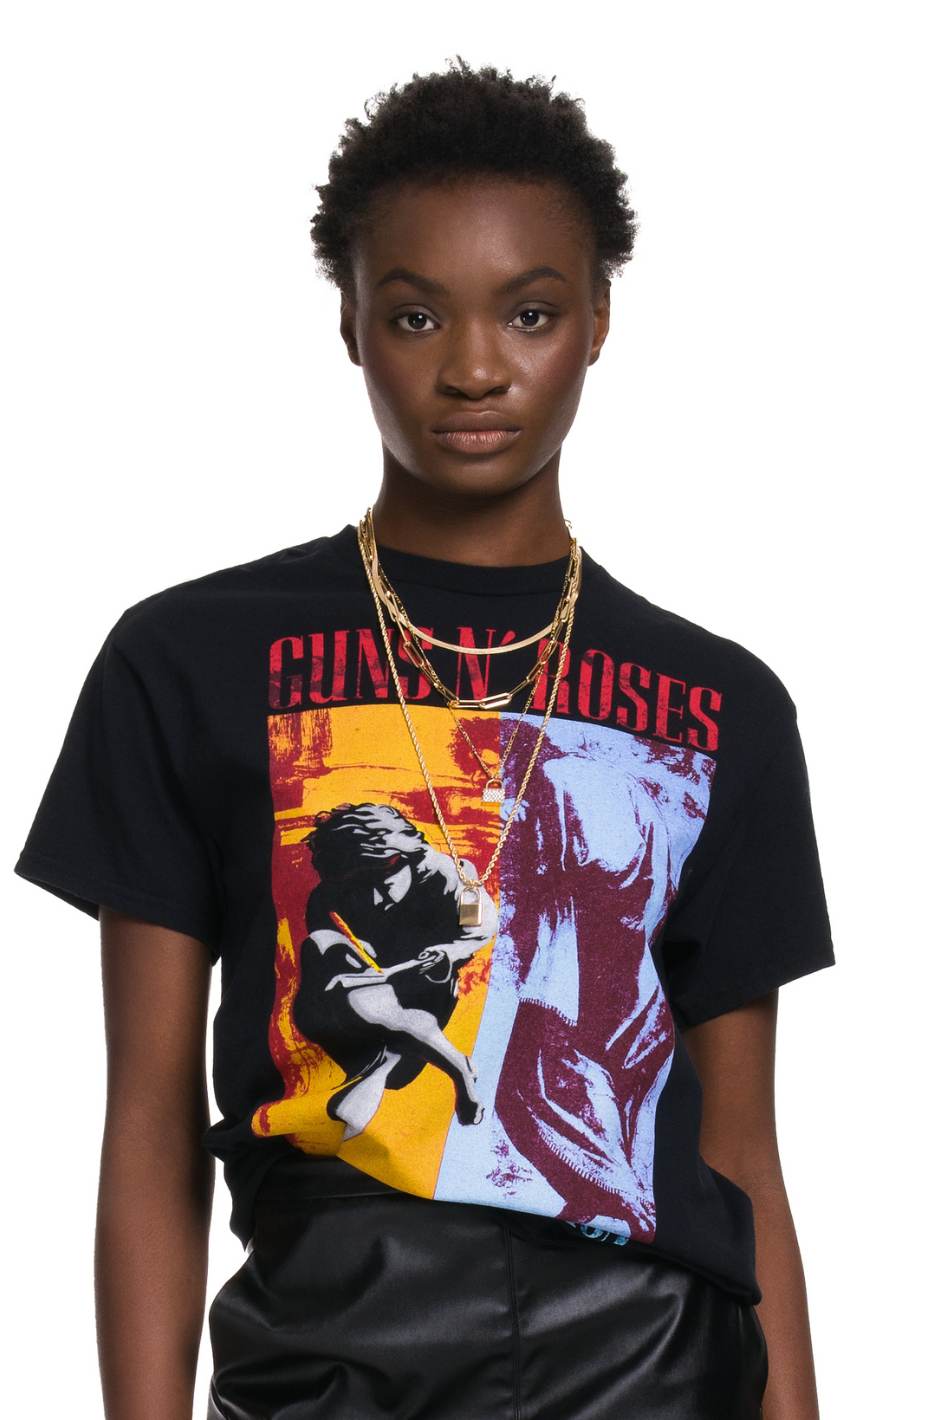 Guns N Roses Illusion Vintage Tee - Expressive Collective CO.